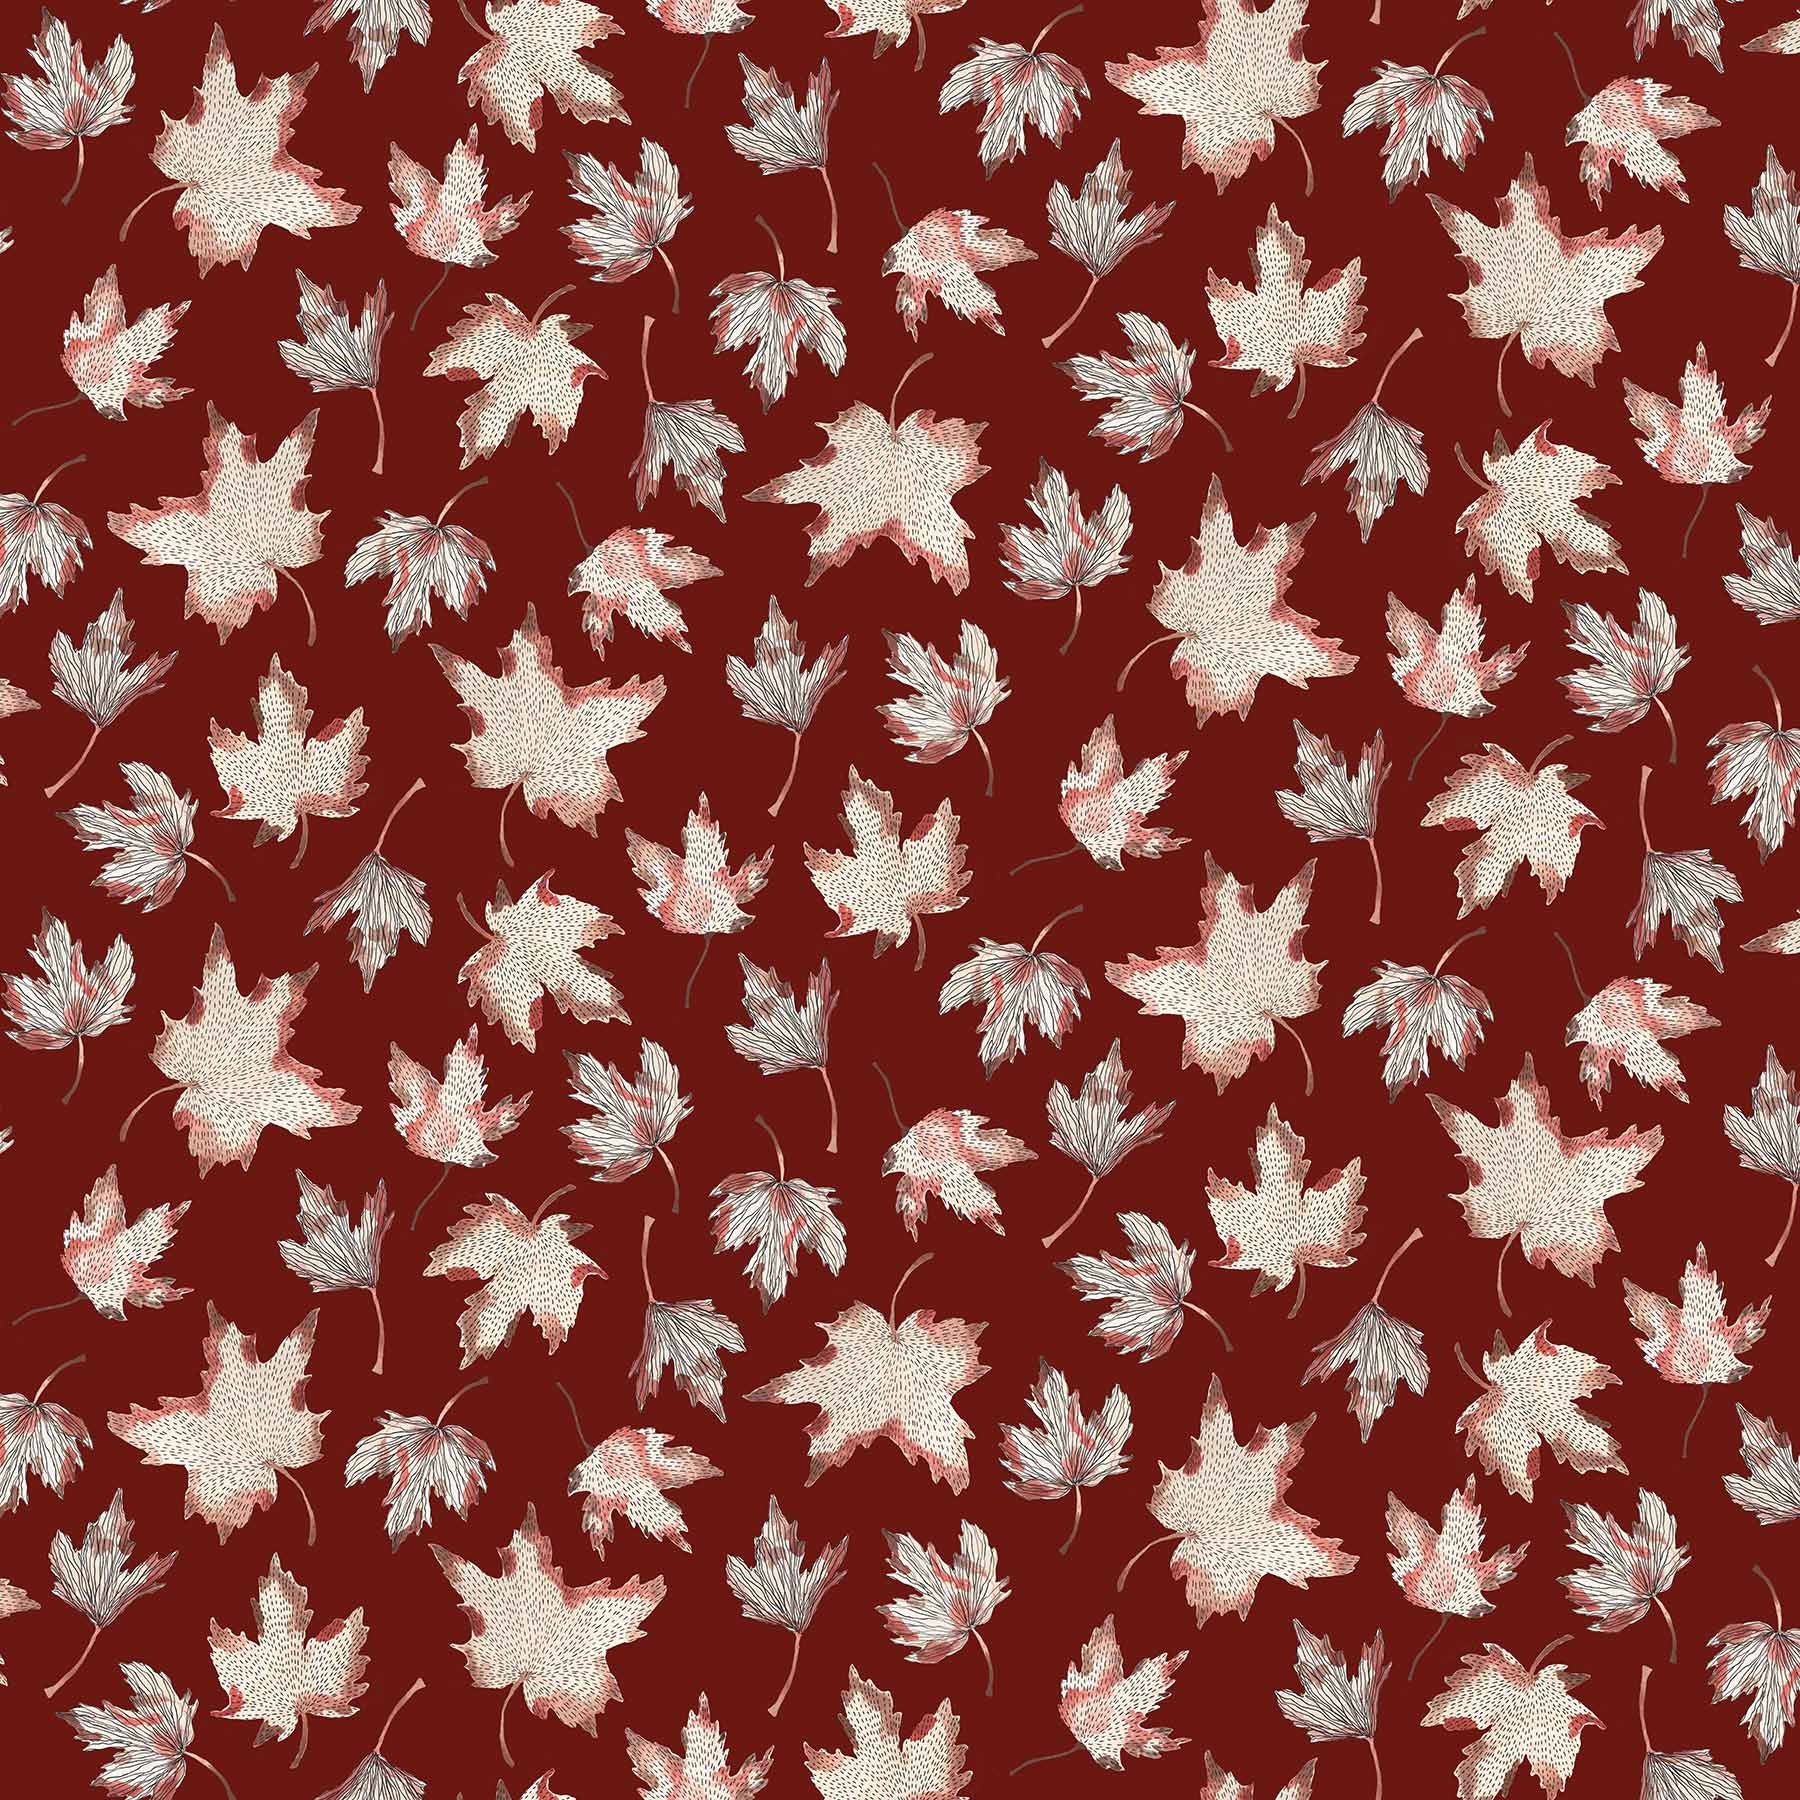 After the Rain Quilt Fabric - Maple Leaves on Mulberry Brown - 90162 29